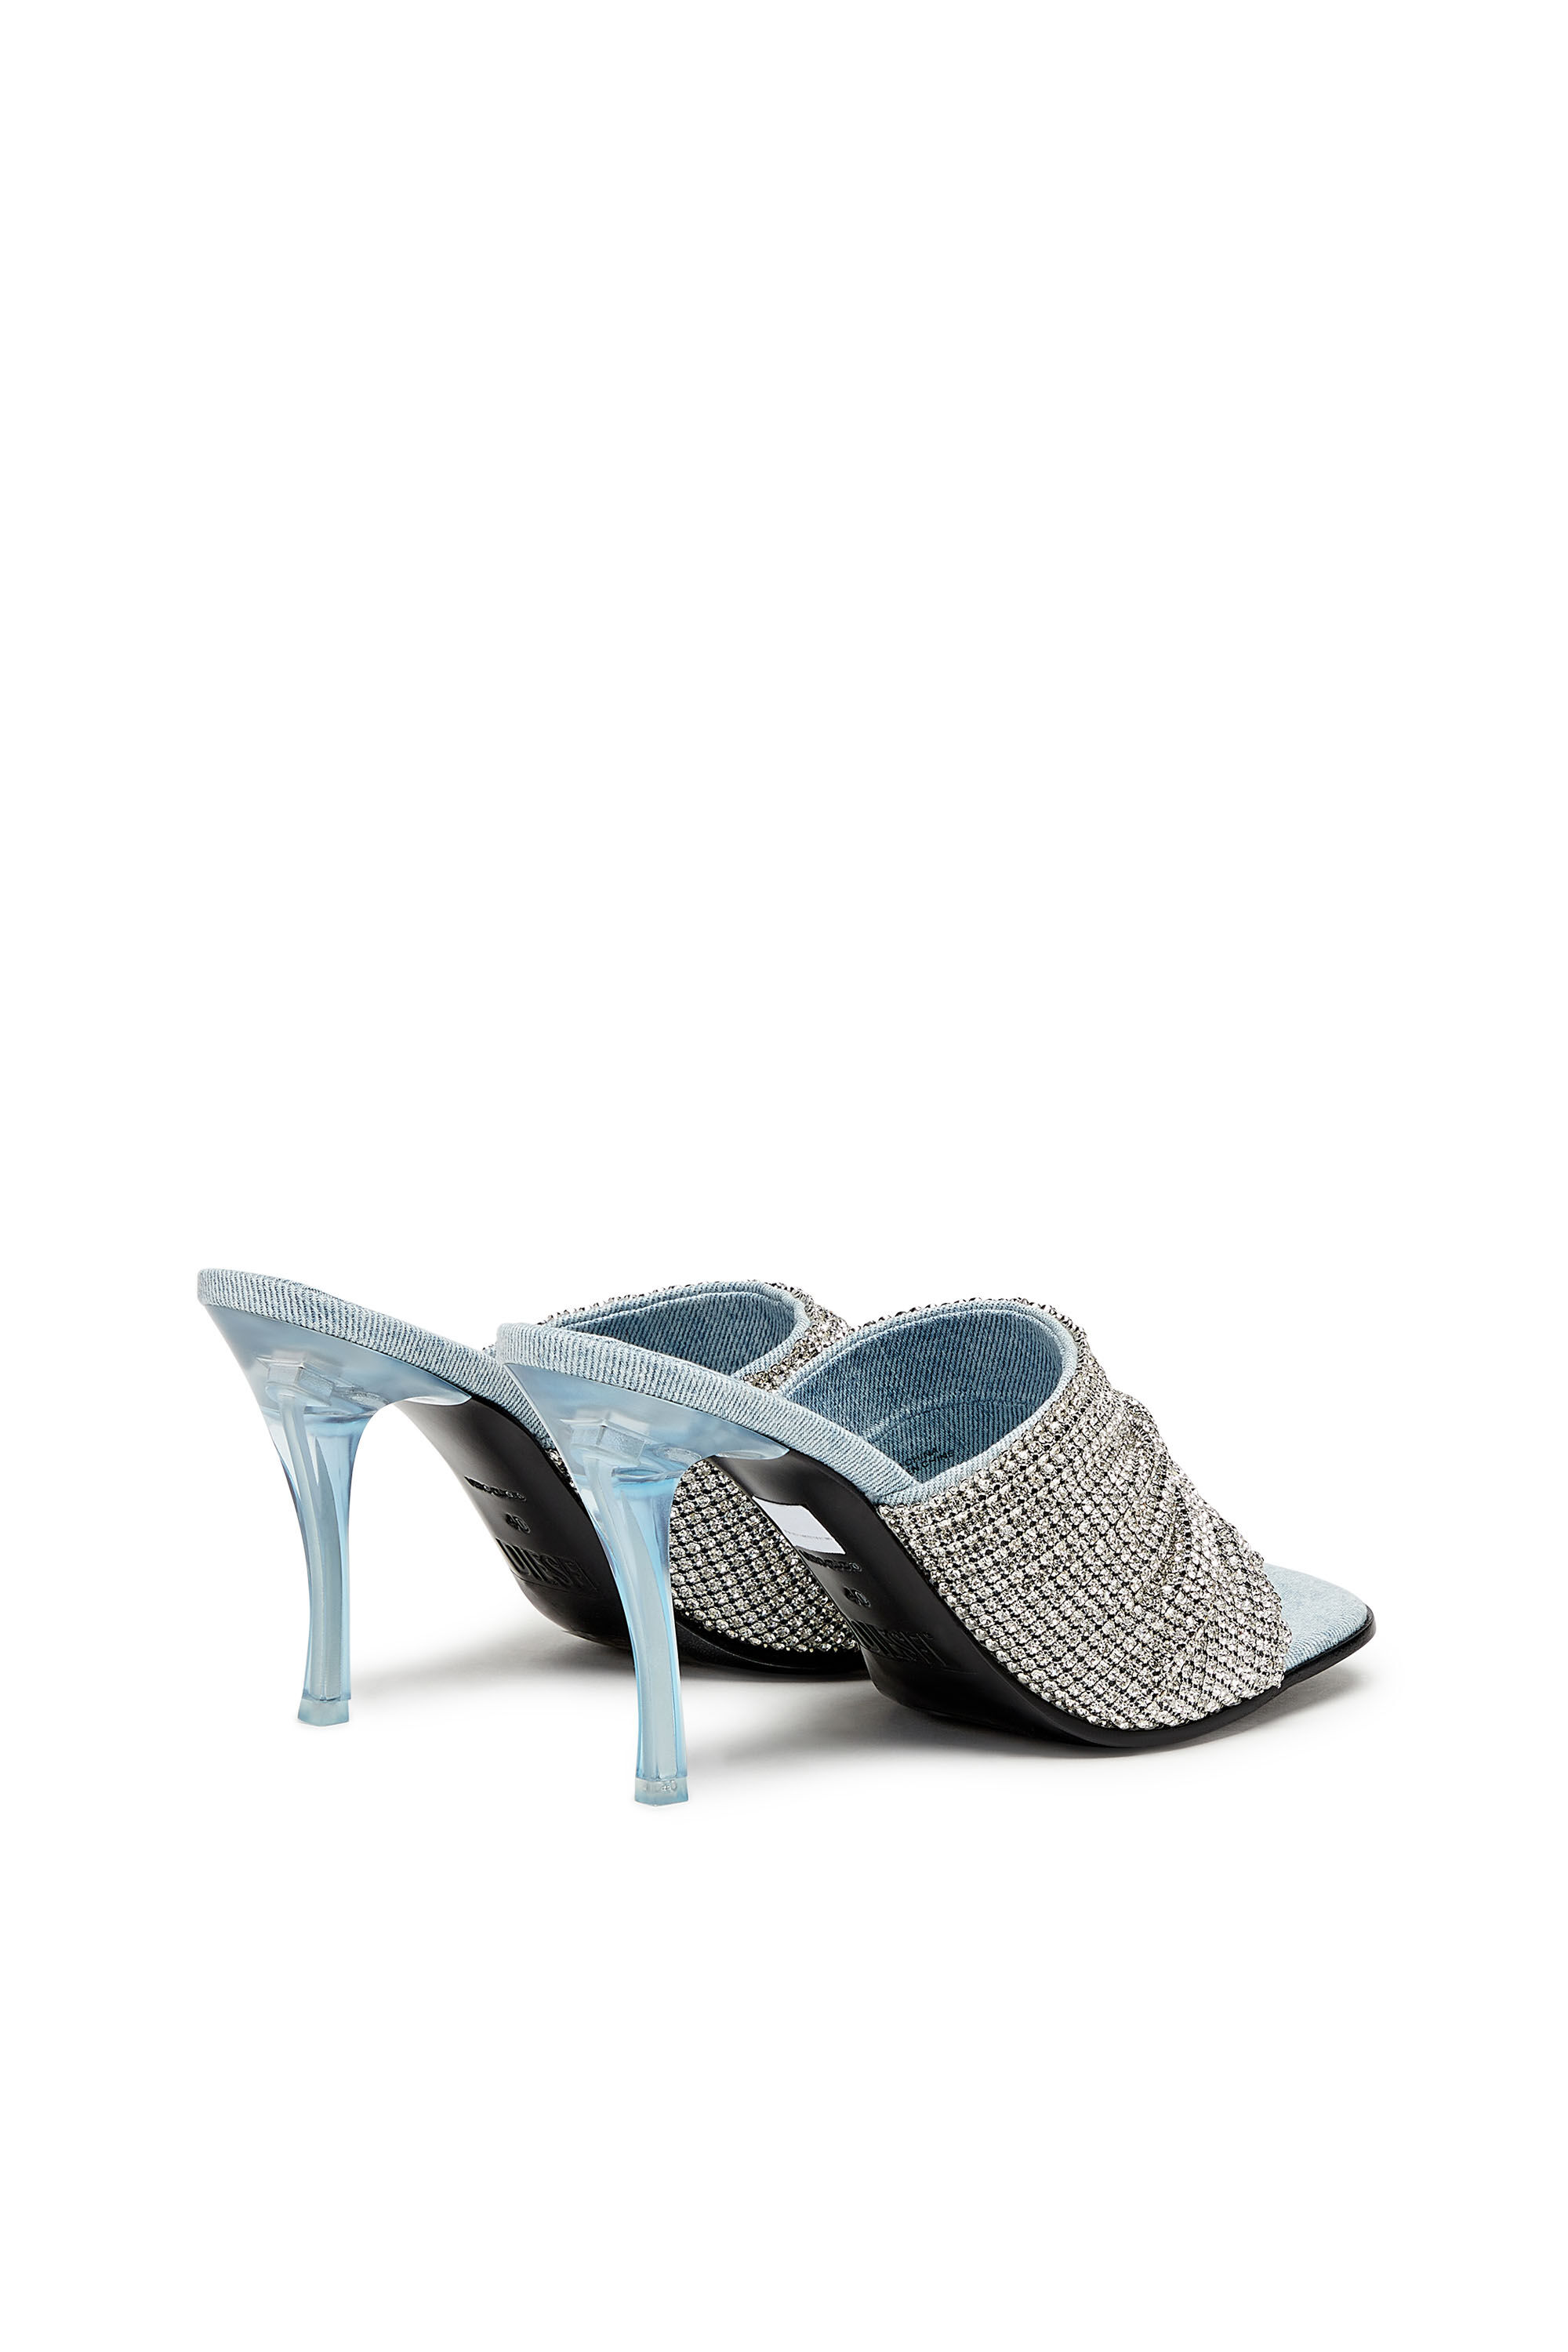 Diesel - D-SYDNEY SDL S, Female D-Sydney Sdl S Sandals - Mule sandals with rhinestone band in Silver - Image 3